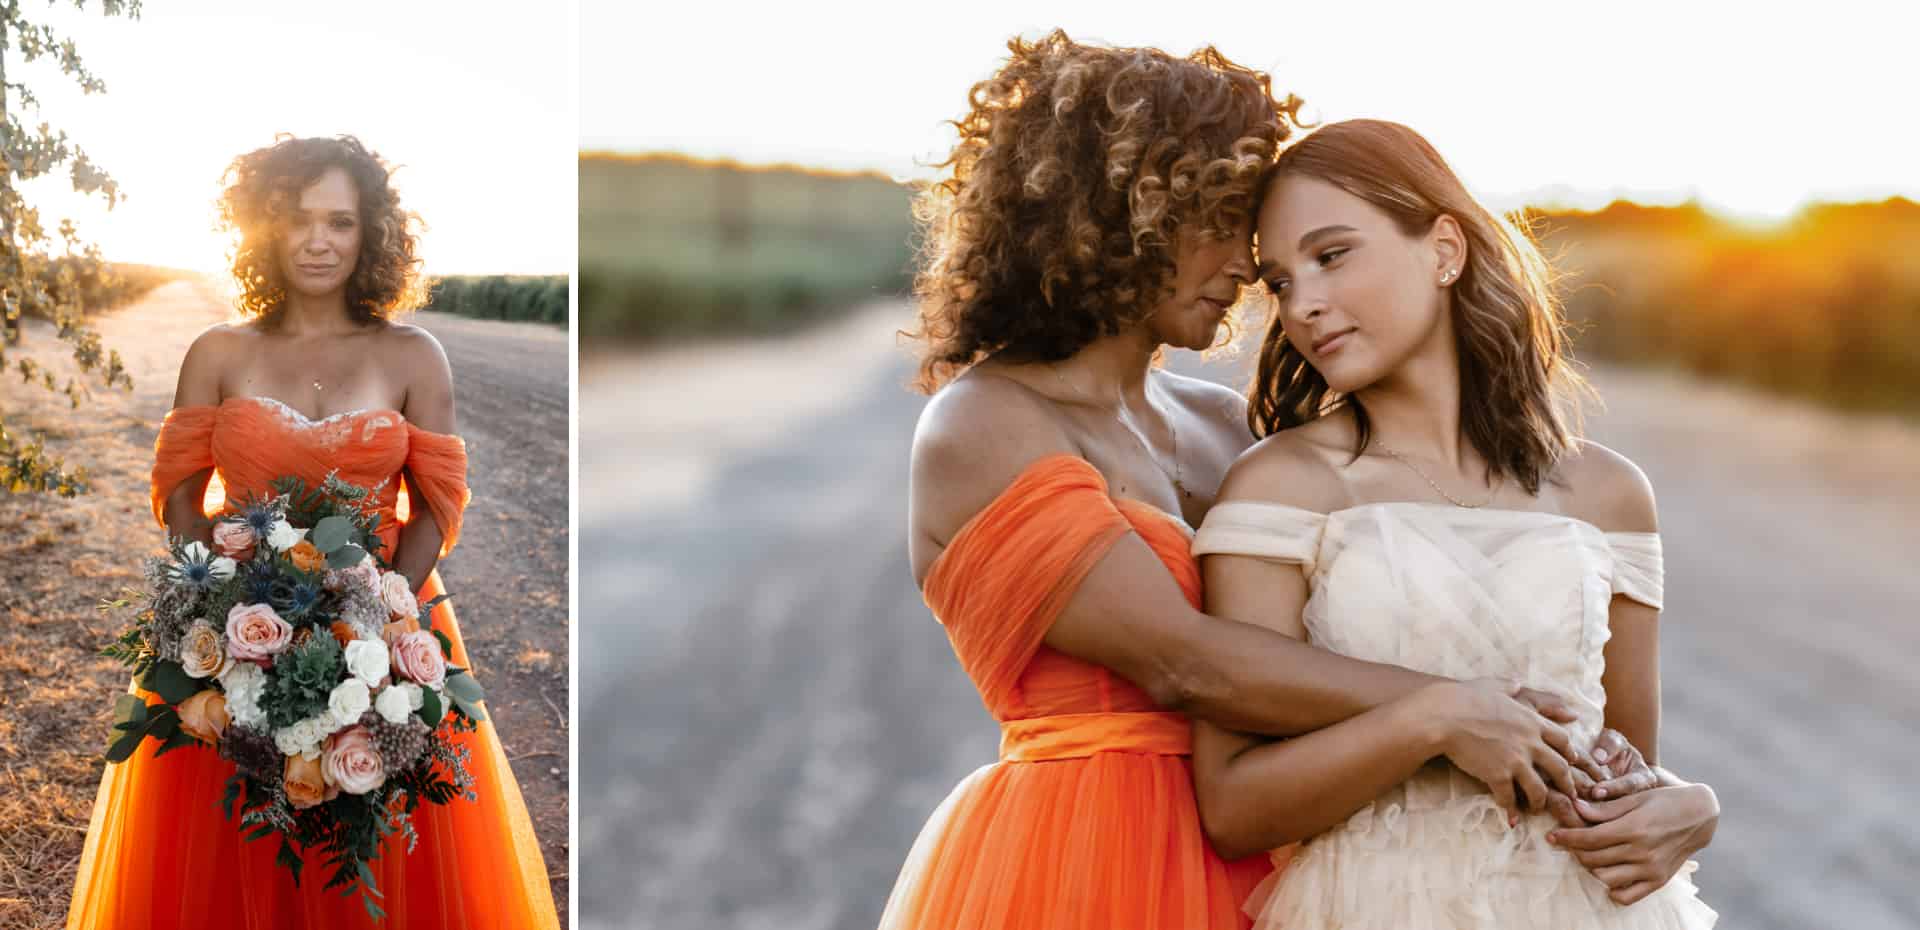 Two brides in orange dresses posing for a photo.